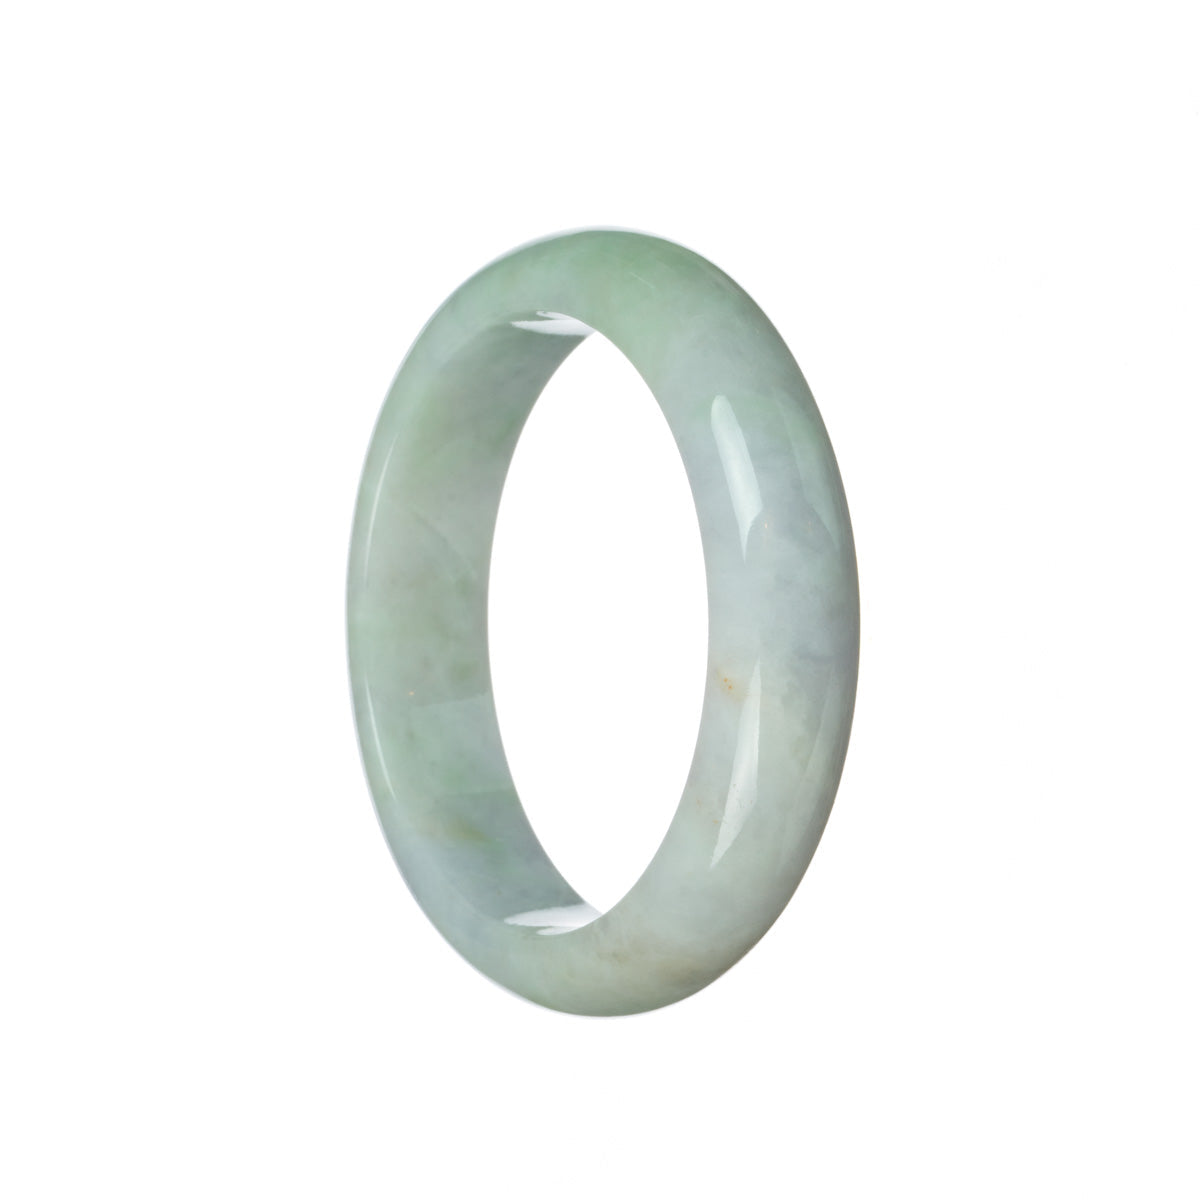 A beautiful lavender-colored bangle bracelet made with genuine natural jadeite, featuring a half-moon shape with a diameter of 58mm. Expertly crafted by MAYS™.